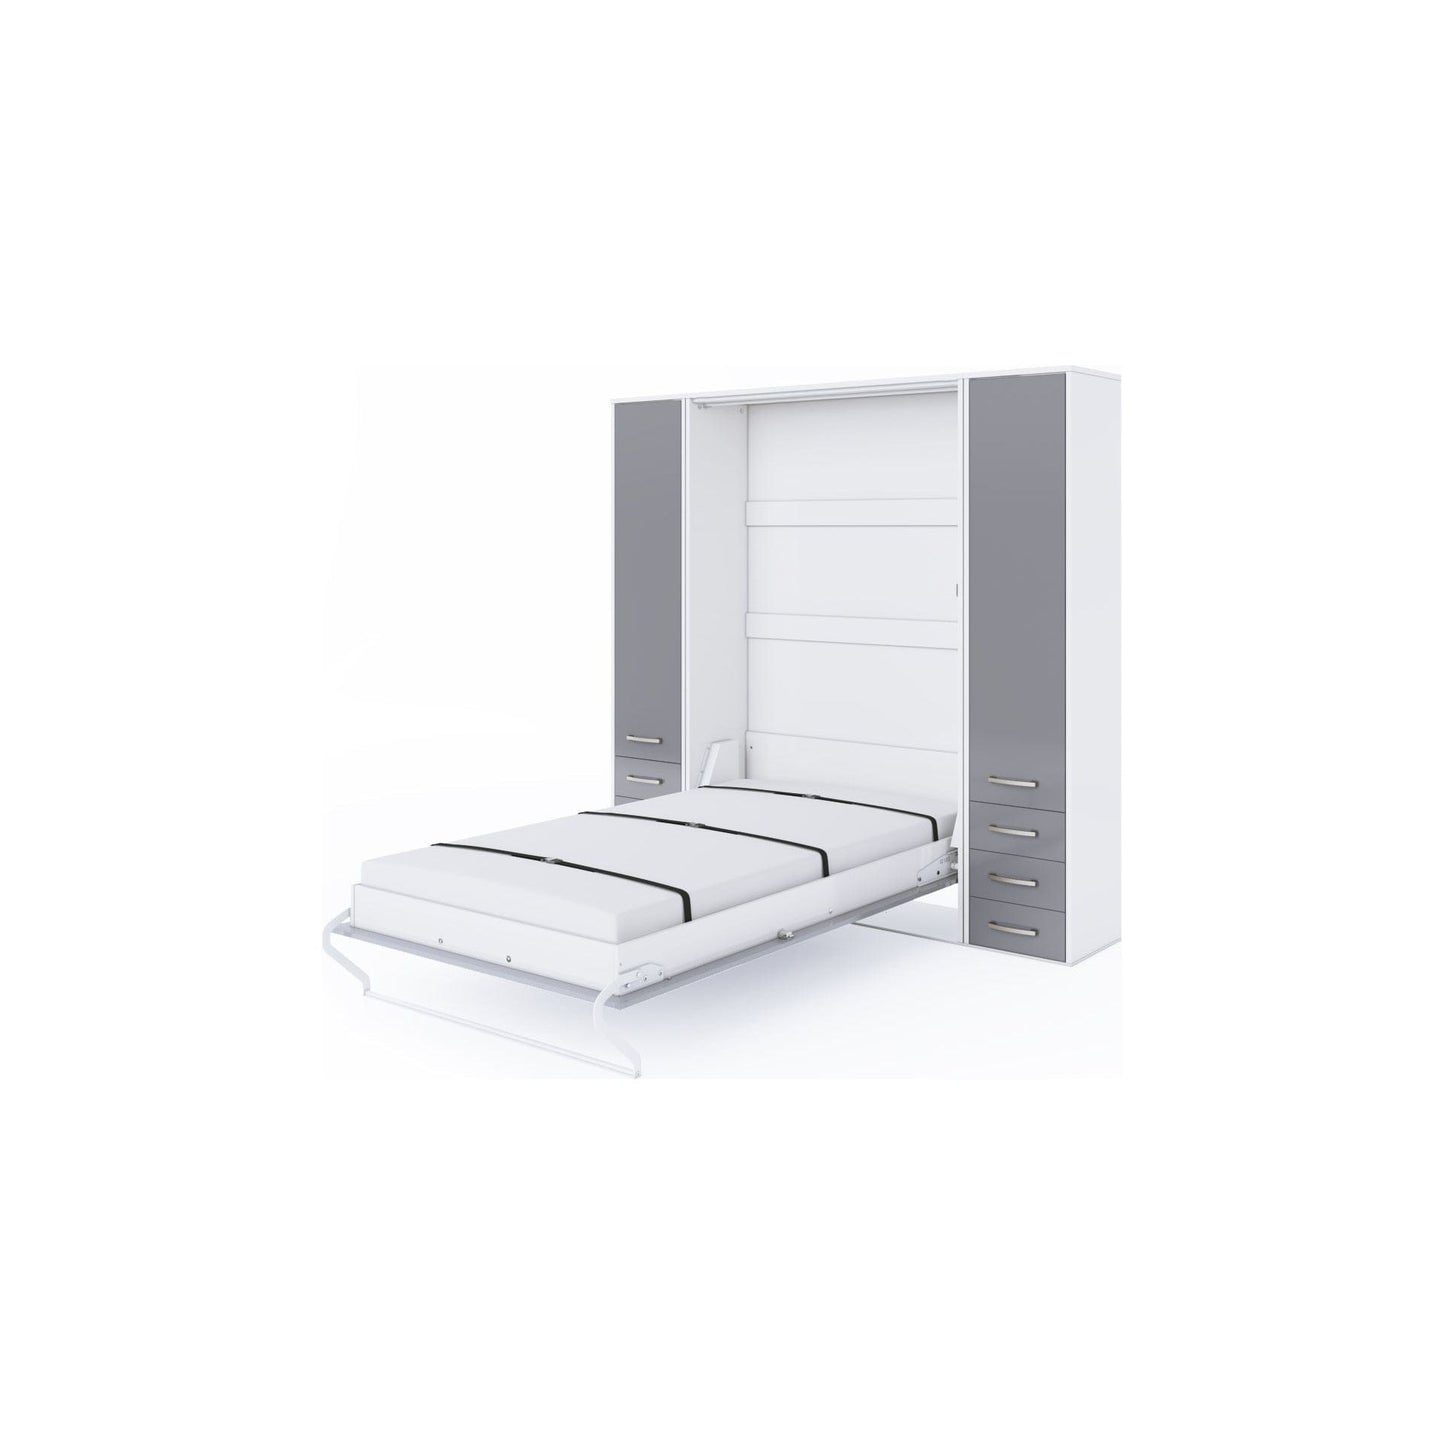 Maxima House Invento Vertical Wall Bed, European Twin Size with 2 cabinets